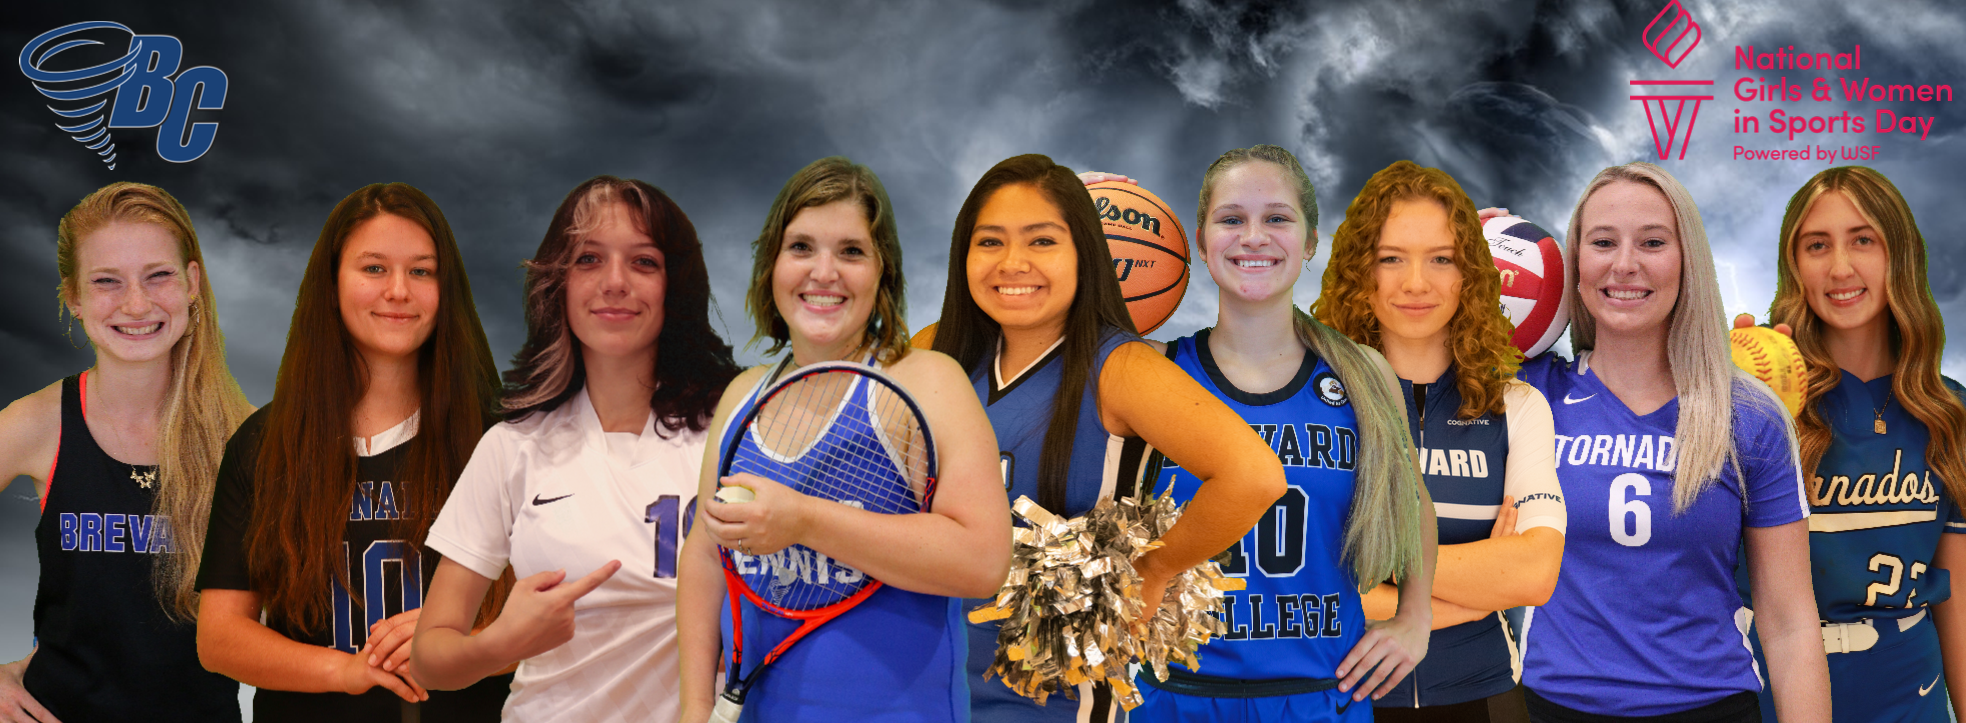 Tornados Celebrate National Girls and Women in Sports Day